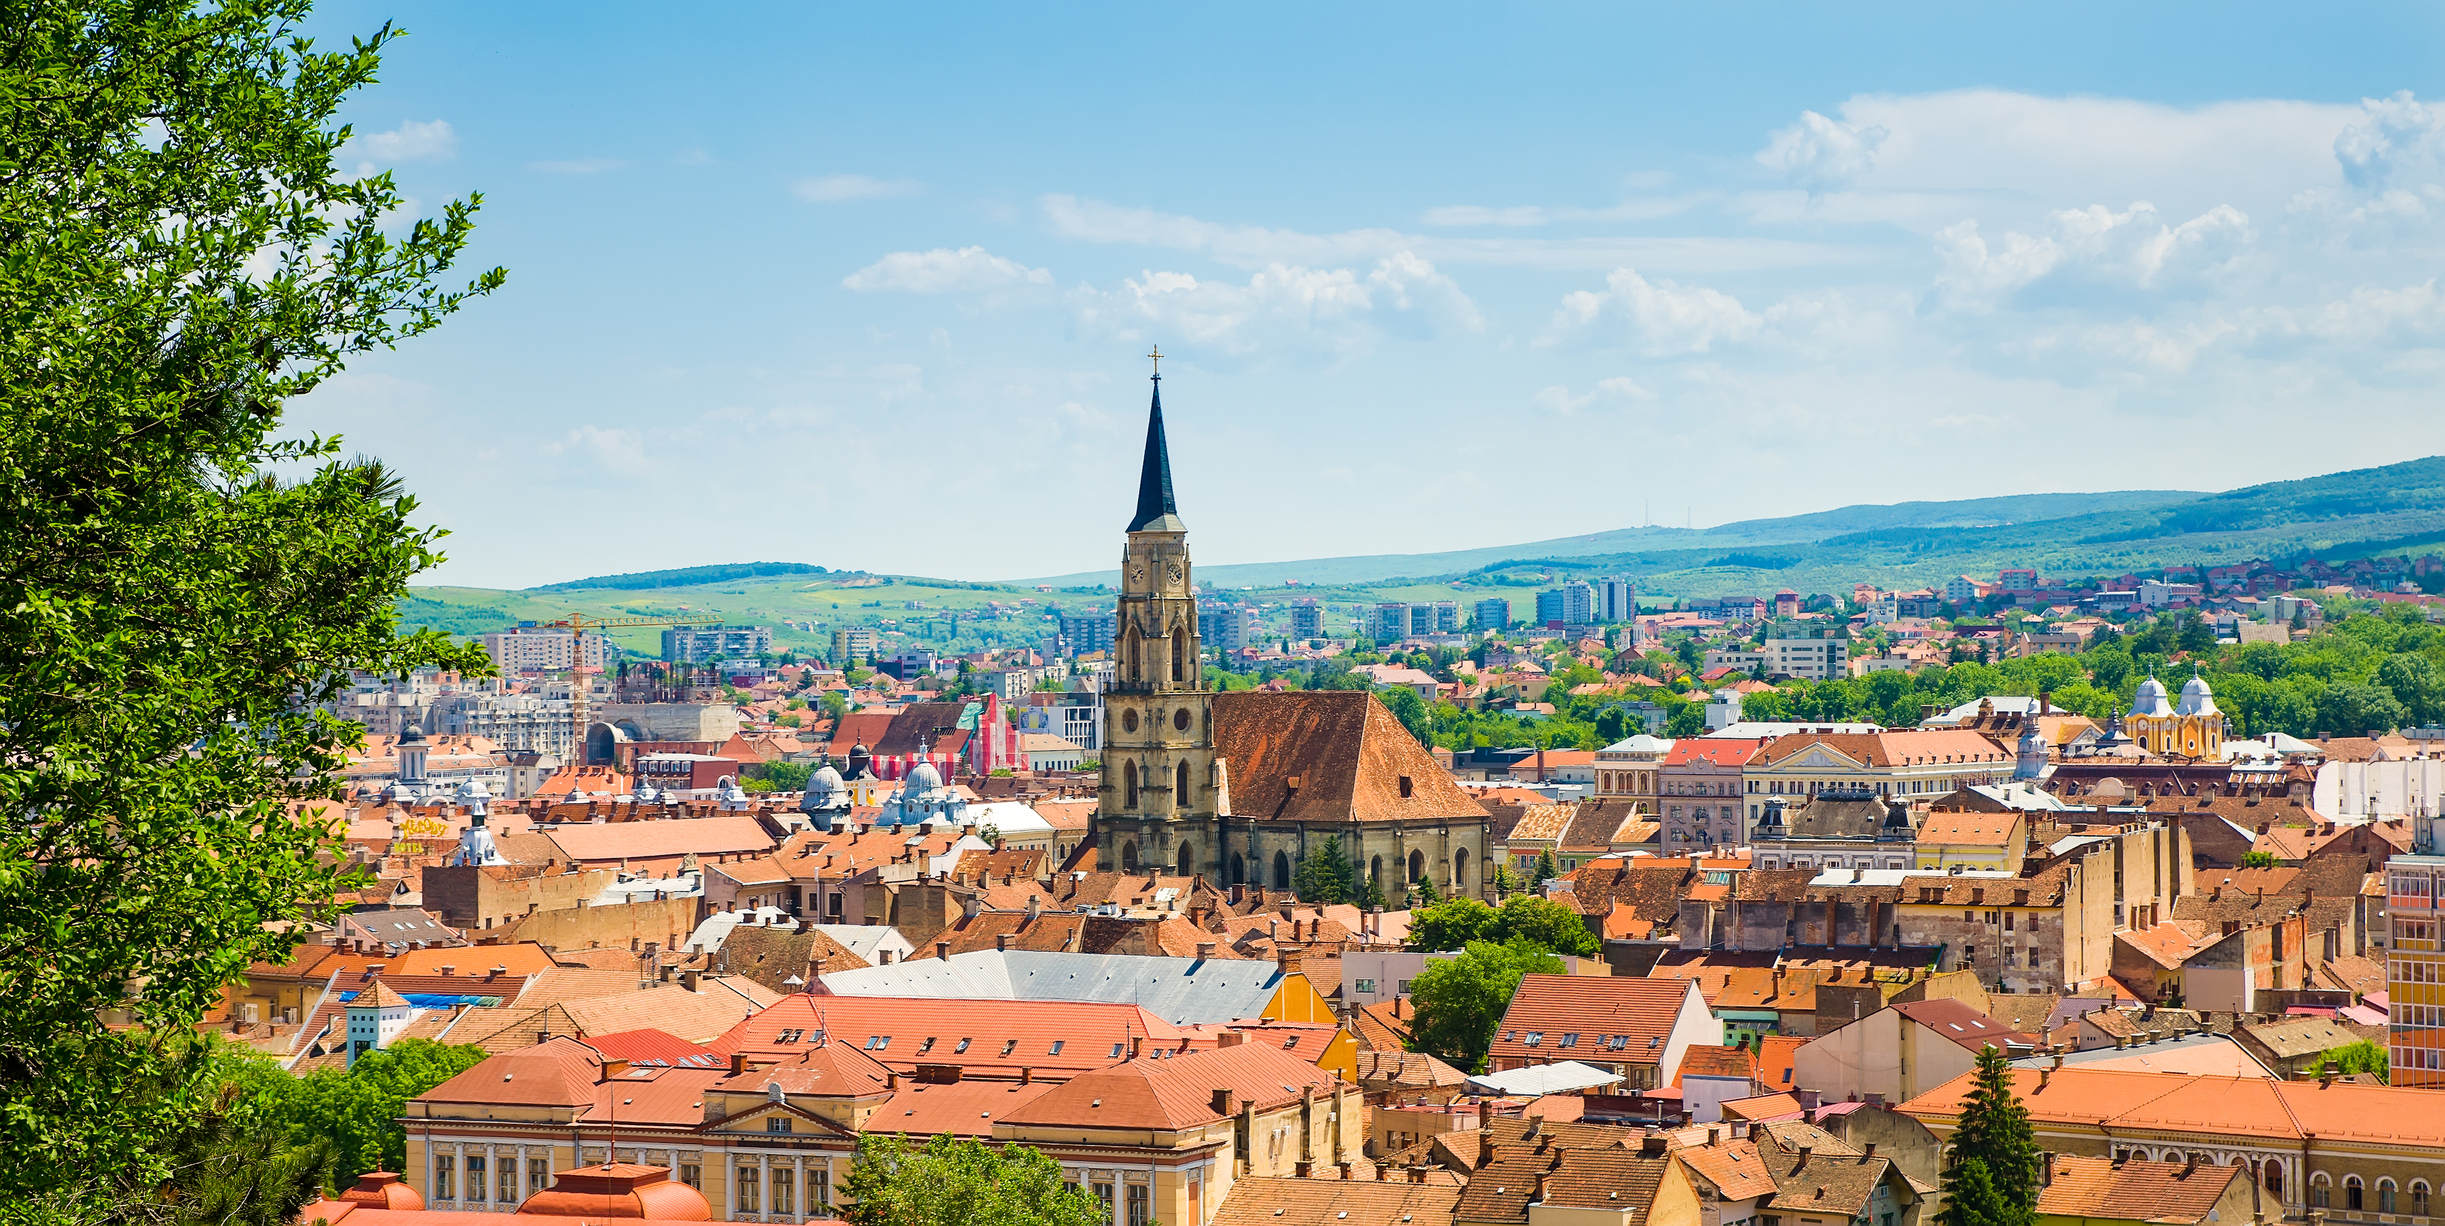 cluj-napoca ranked tenth on list of most livable cities in europe